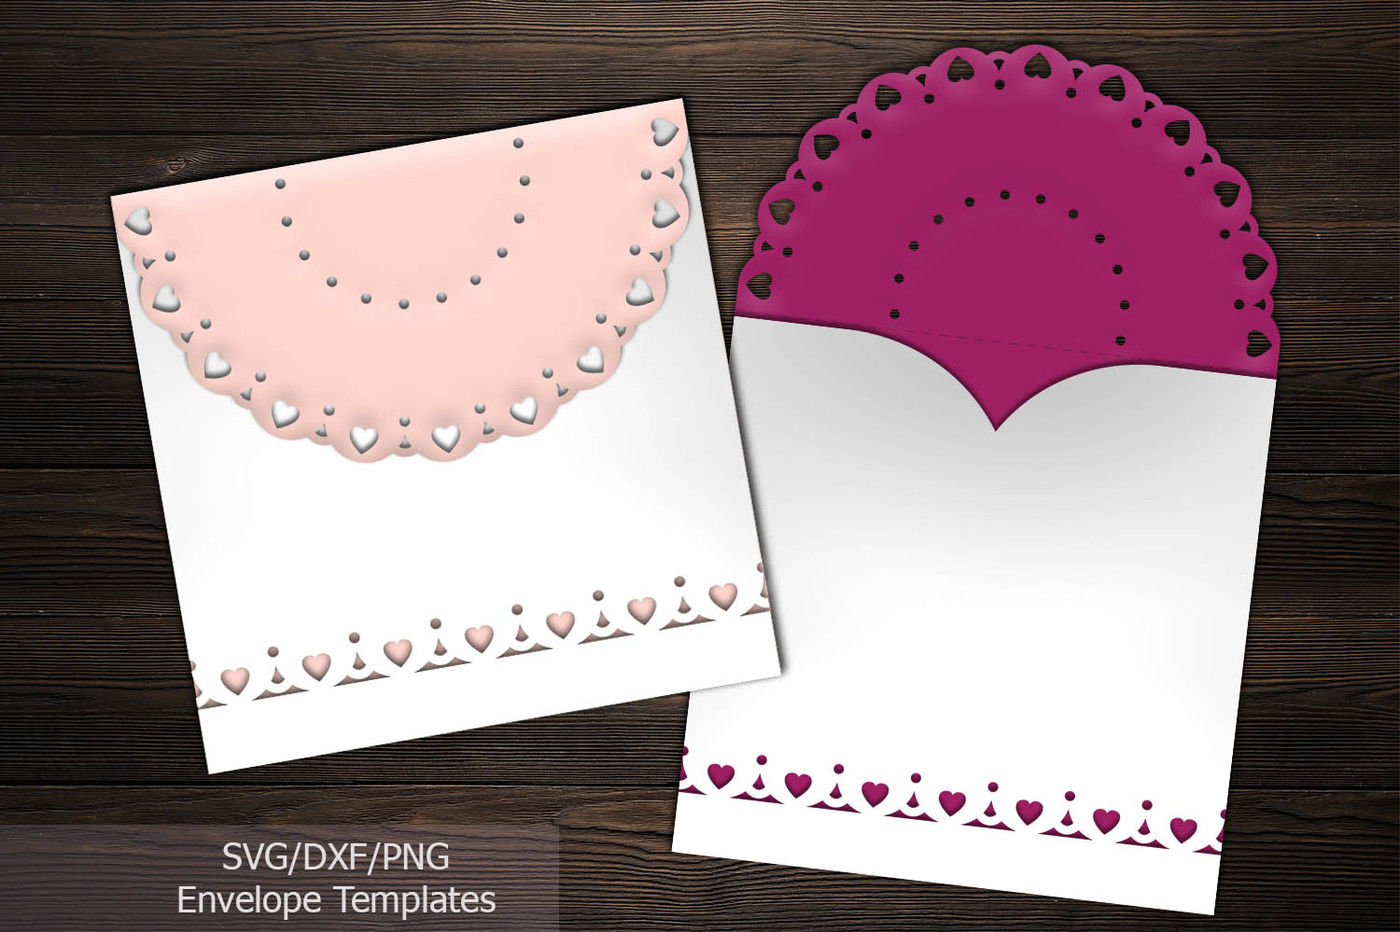 Download Rustic Lace Envelope Svg Cutting Template Wedding Invitation By Kartcreation Thehungryjpeg Com